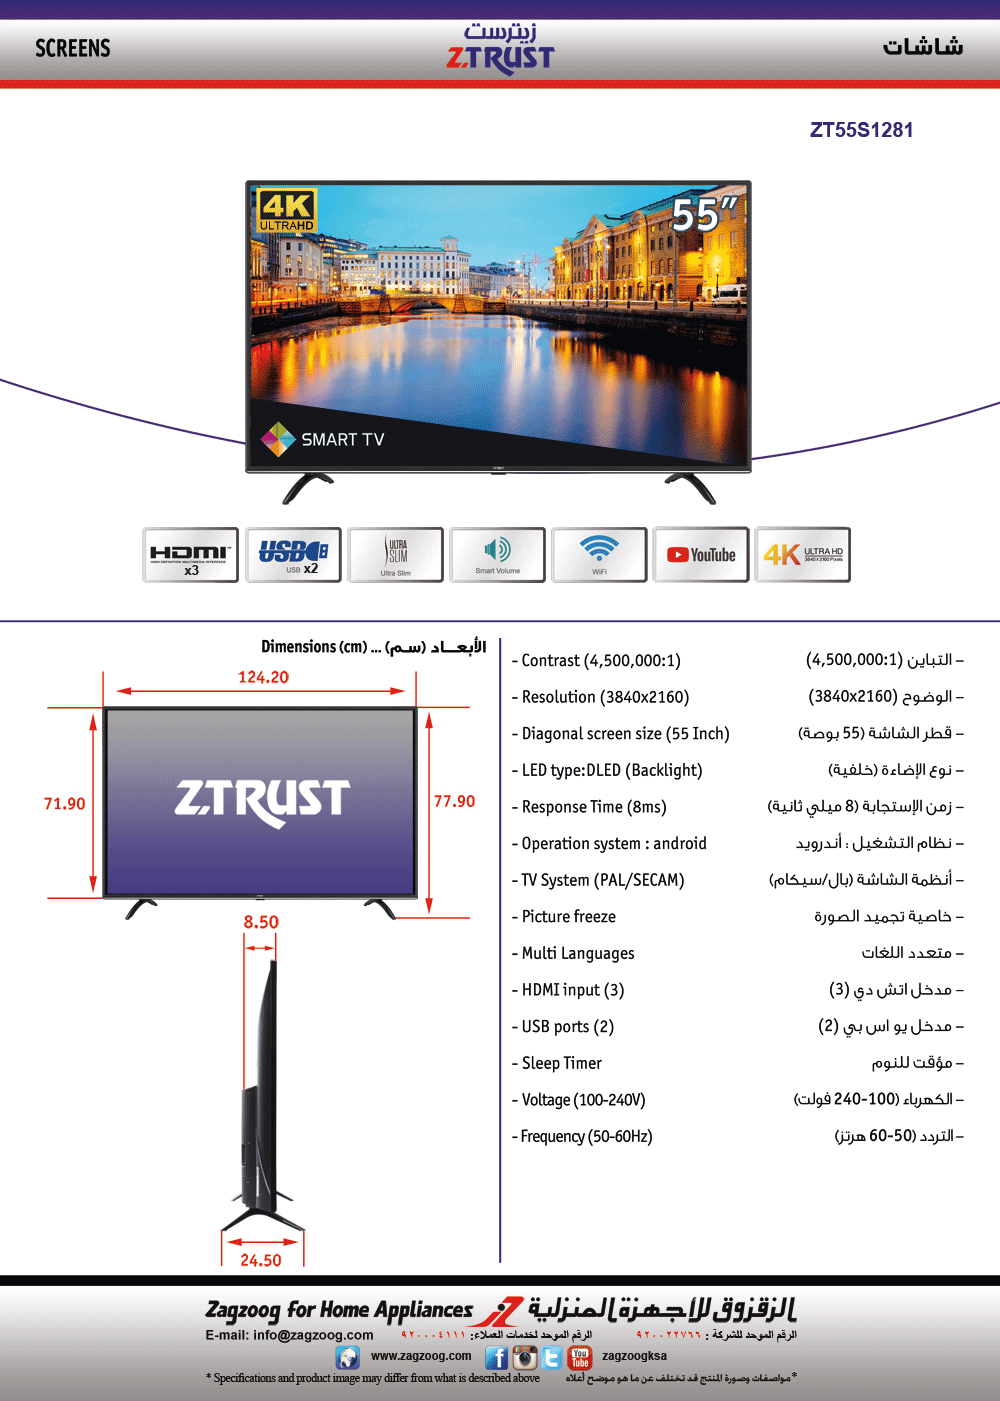 Zagzoog For Home Appliances Products Z Trust Tv 55 Dled 4k 2xhdmi 2xusb Android Smart